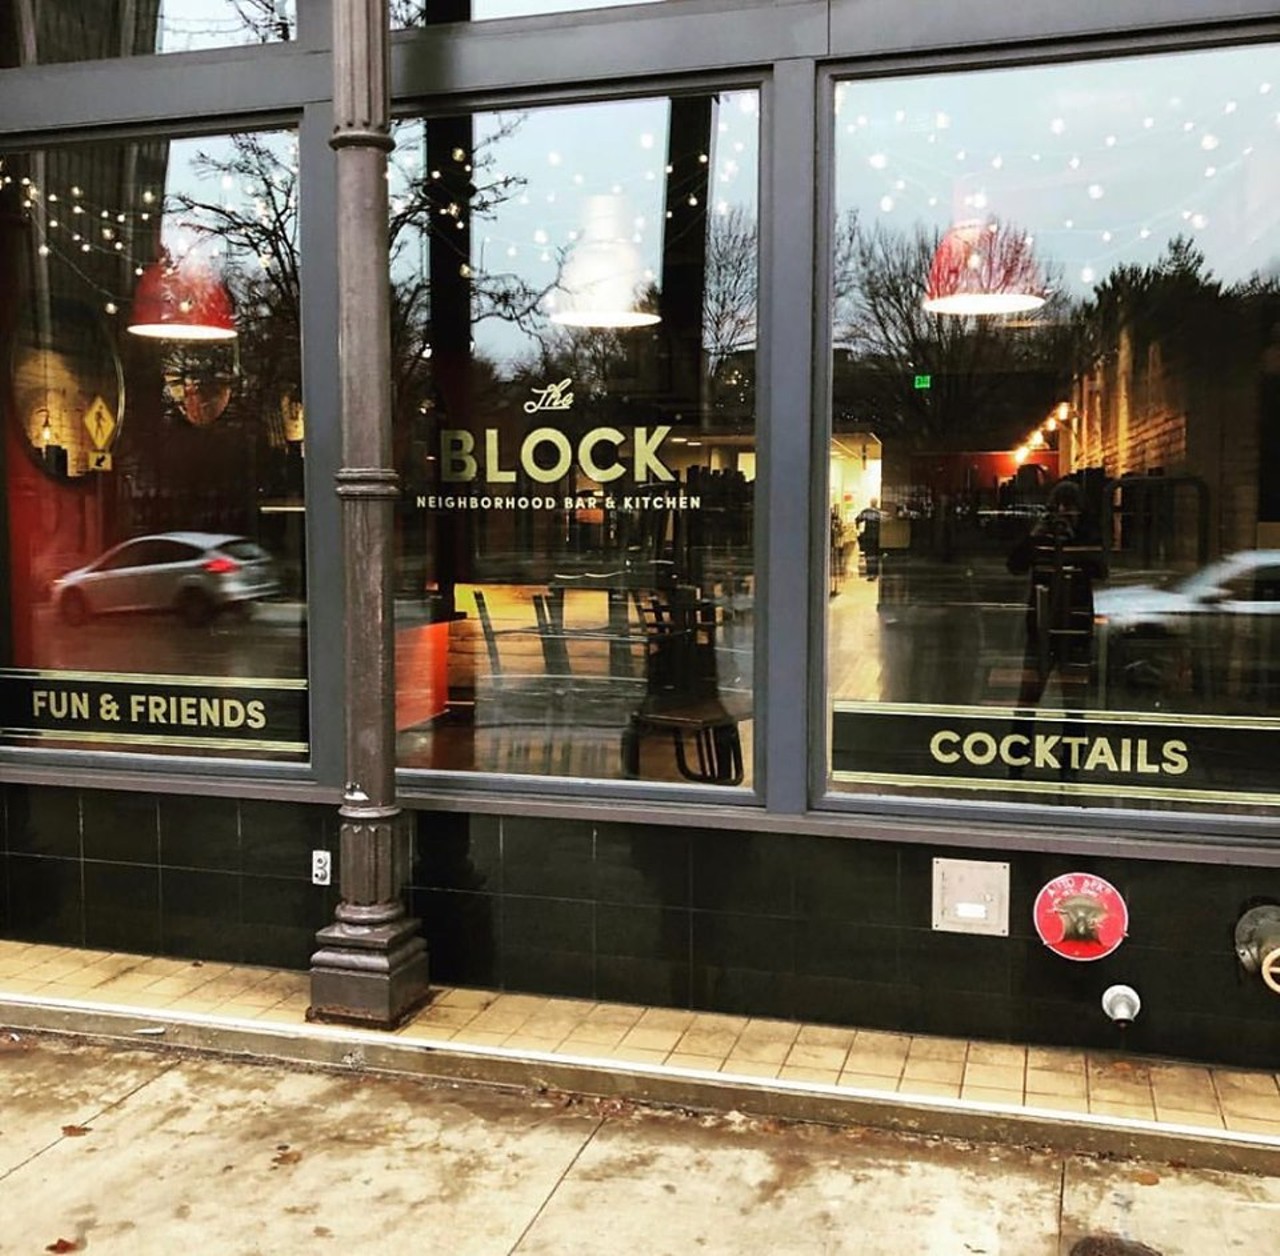 The Block
919 Woodward Ave., Detroit
At the Block, dinner for two (including two appetizers, two entrees, and a round of drinks) can be had for less than $50, making date night affordable. The Block is a spacious venue for after work drinks and an alternative to cafeteria food for lunch, too.
Photo via  The Block Detroit / Facebook 